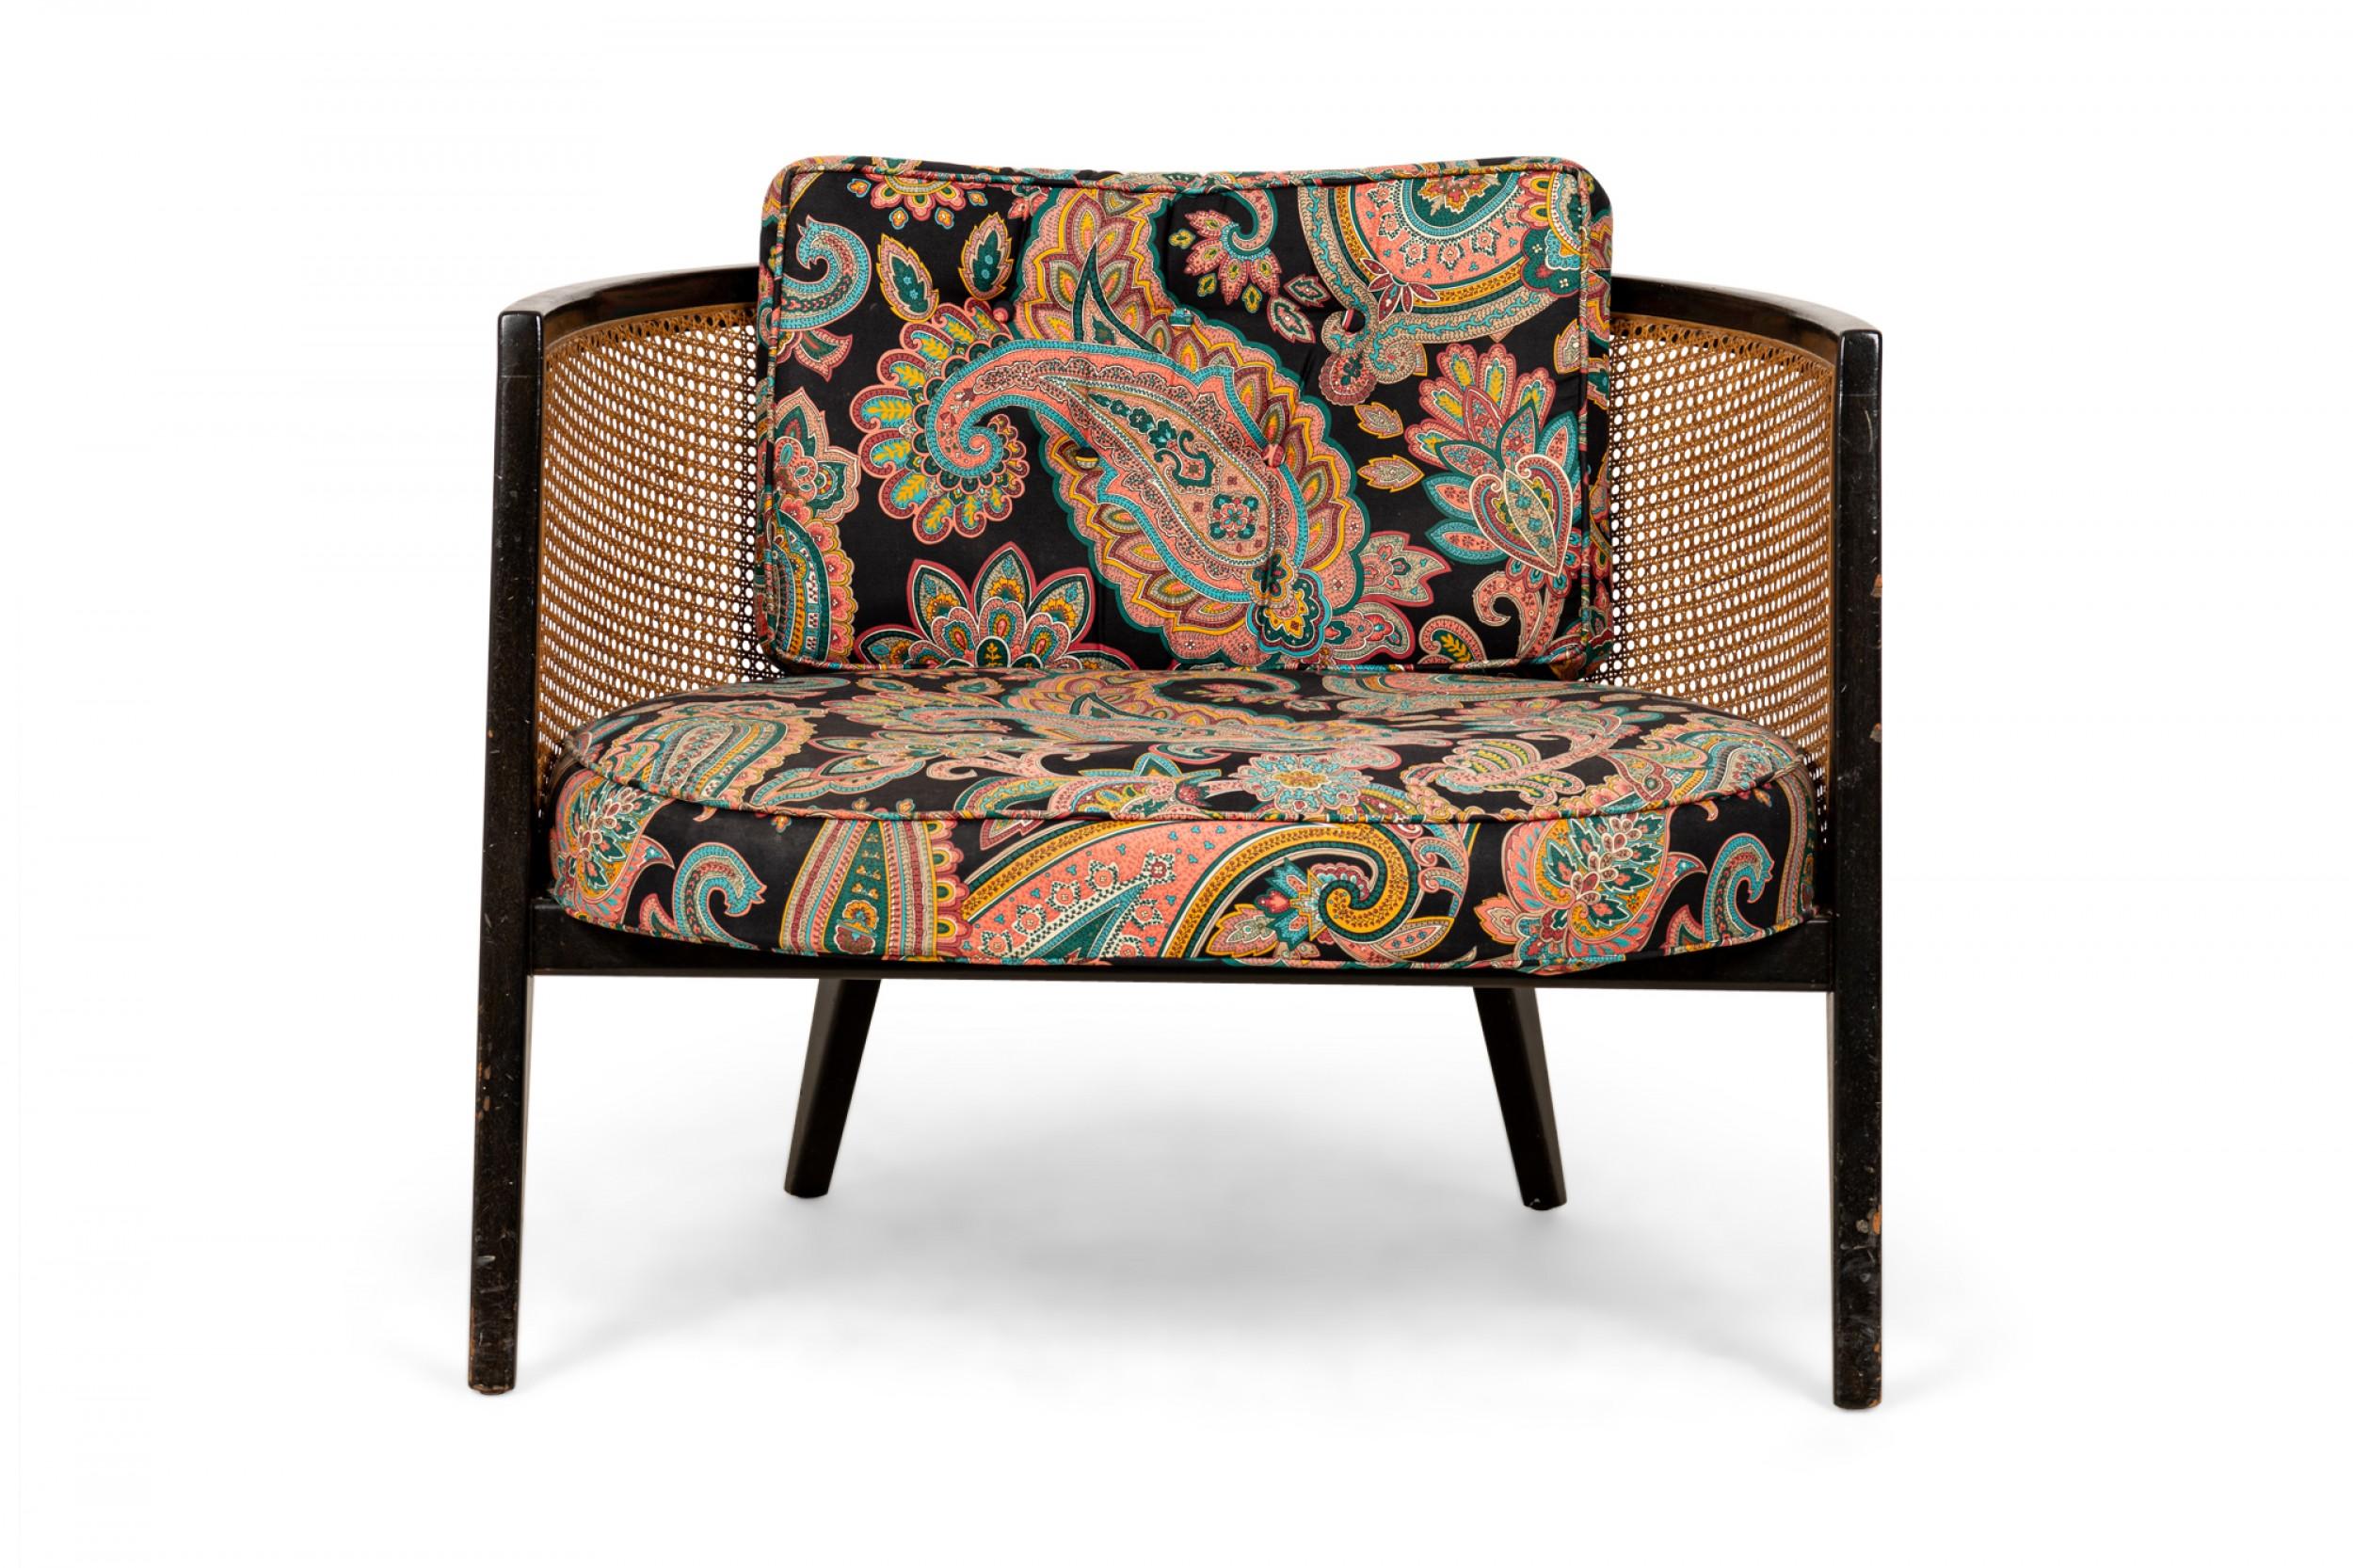 American mid-century hoop form lounge armchair with a curved ebonized wooden frame, caned back, seat, and sides, and a multicolored paisley patterned fabric upholstered seat and back cushion, resting on four angled tapered square legs. (HARVEY